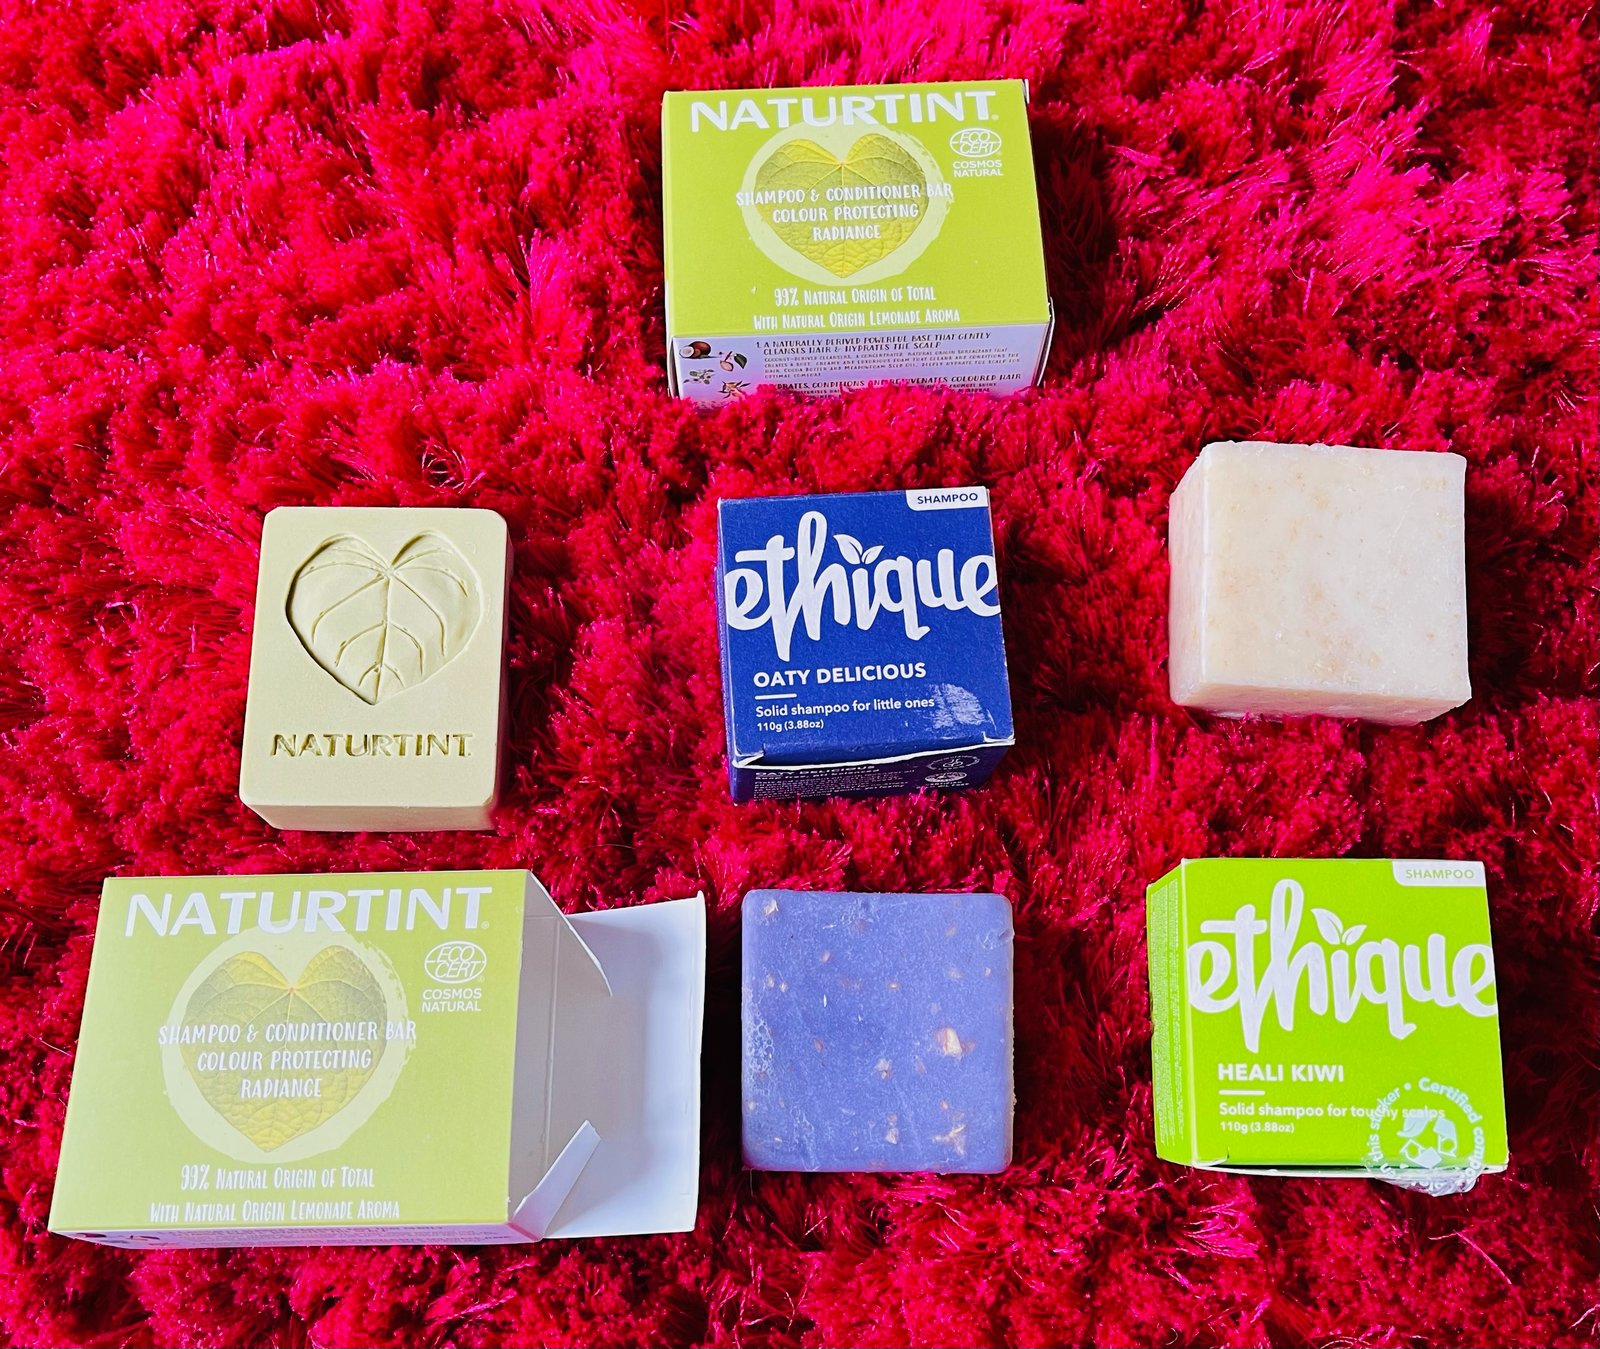 Naturtint and ethique zero-waste, natural solid shampoo bars for adults and kids on red fluffy rug